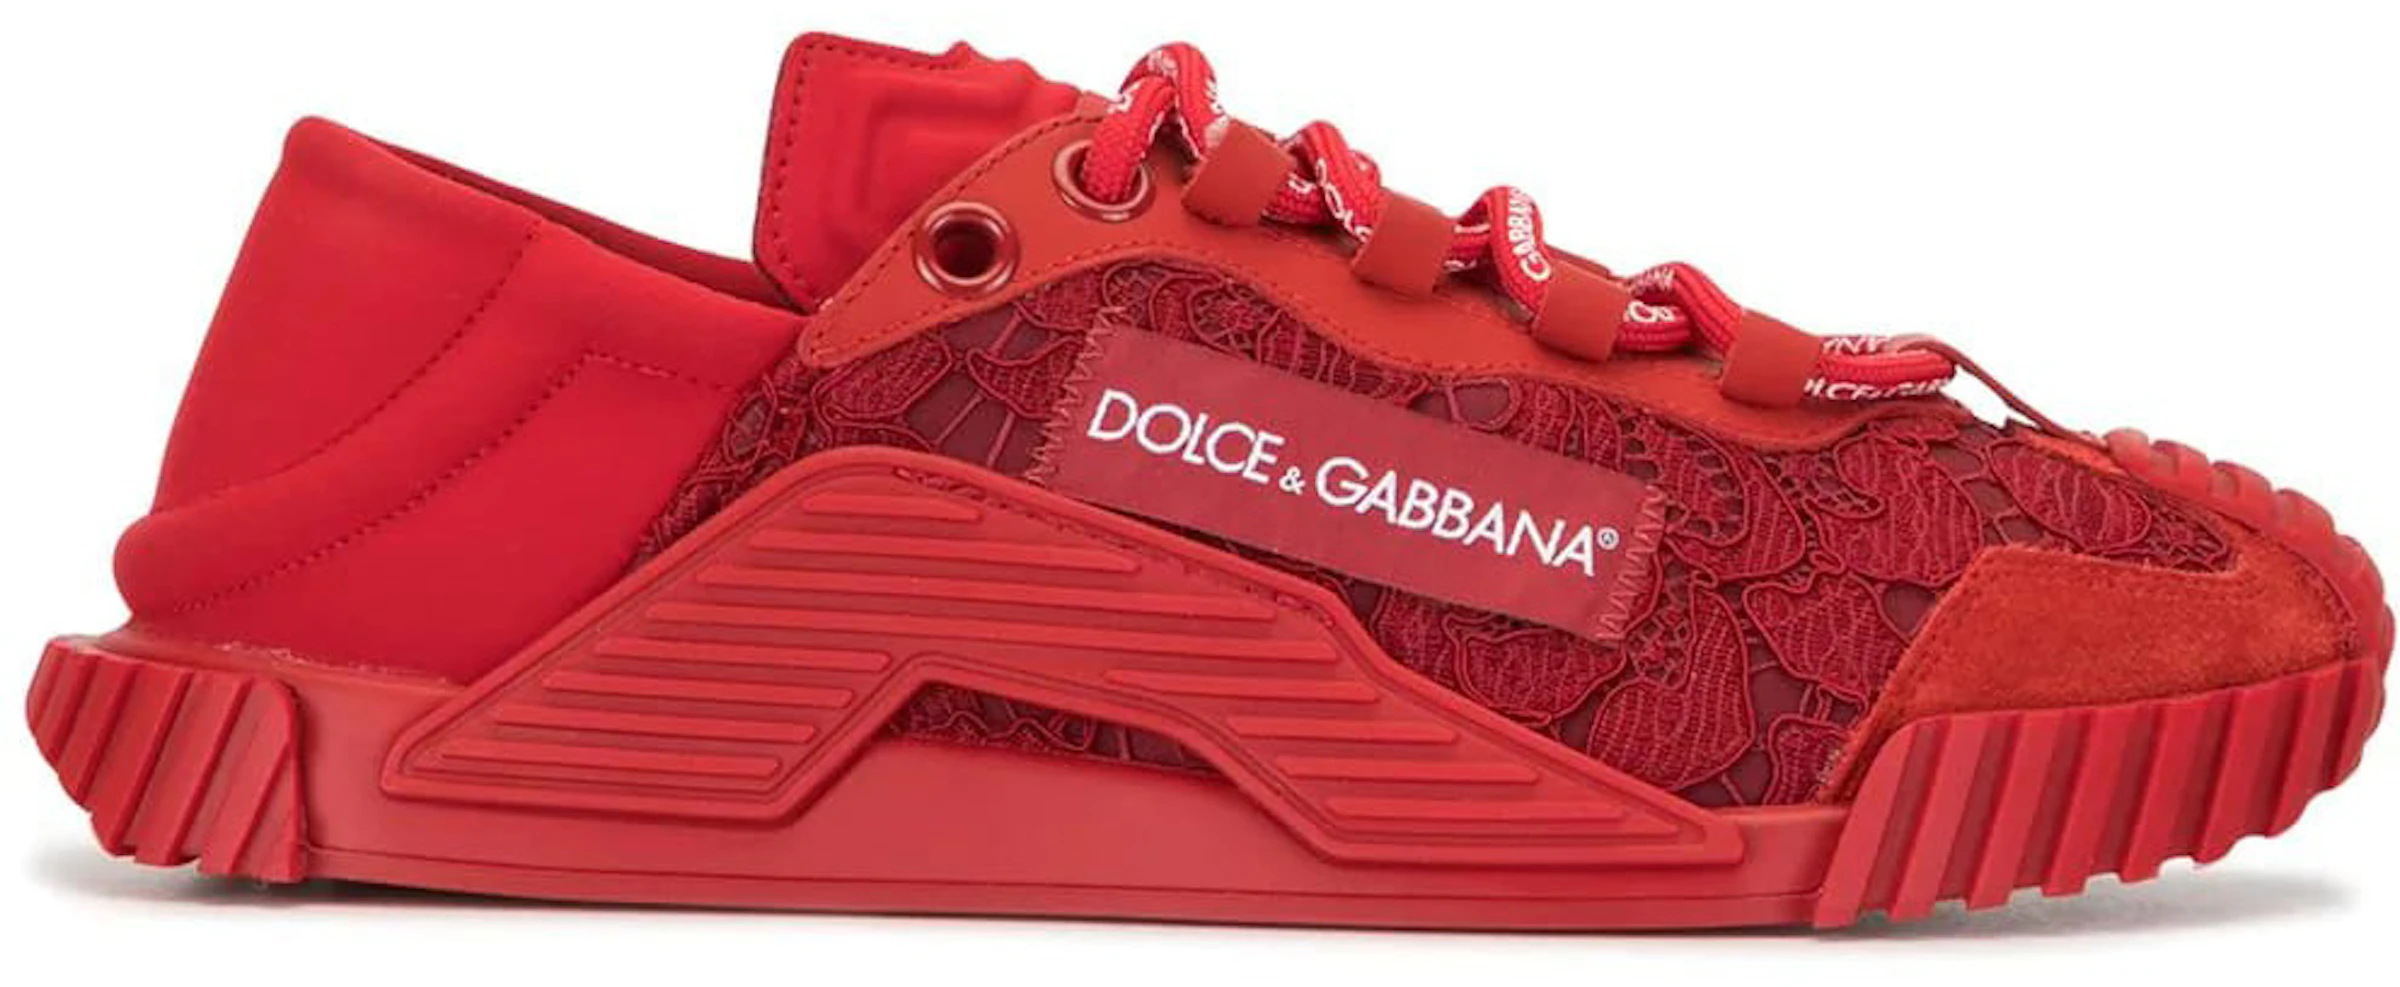 Dolce & Gabbana NS1 Low Top Red Lace (Women's) - CK1754AX37280304 - US